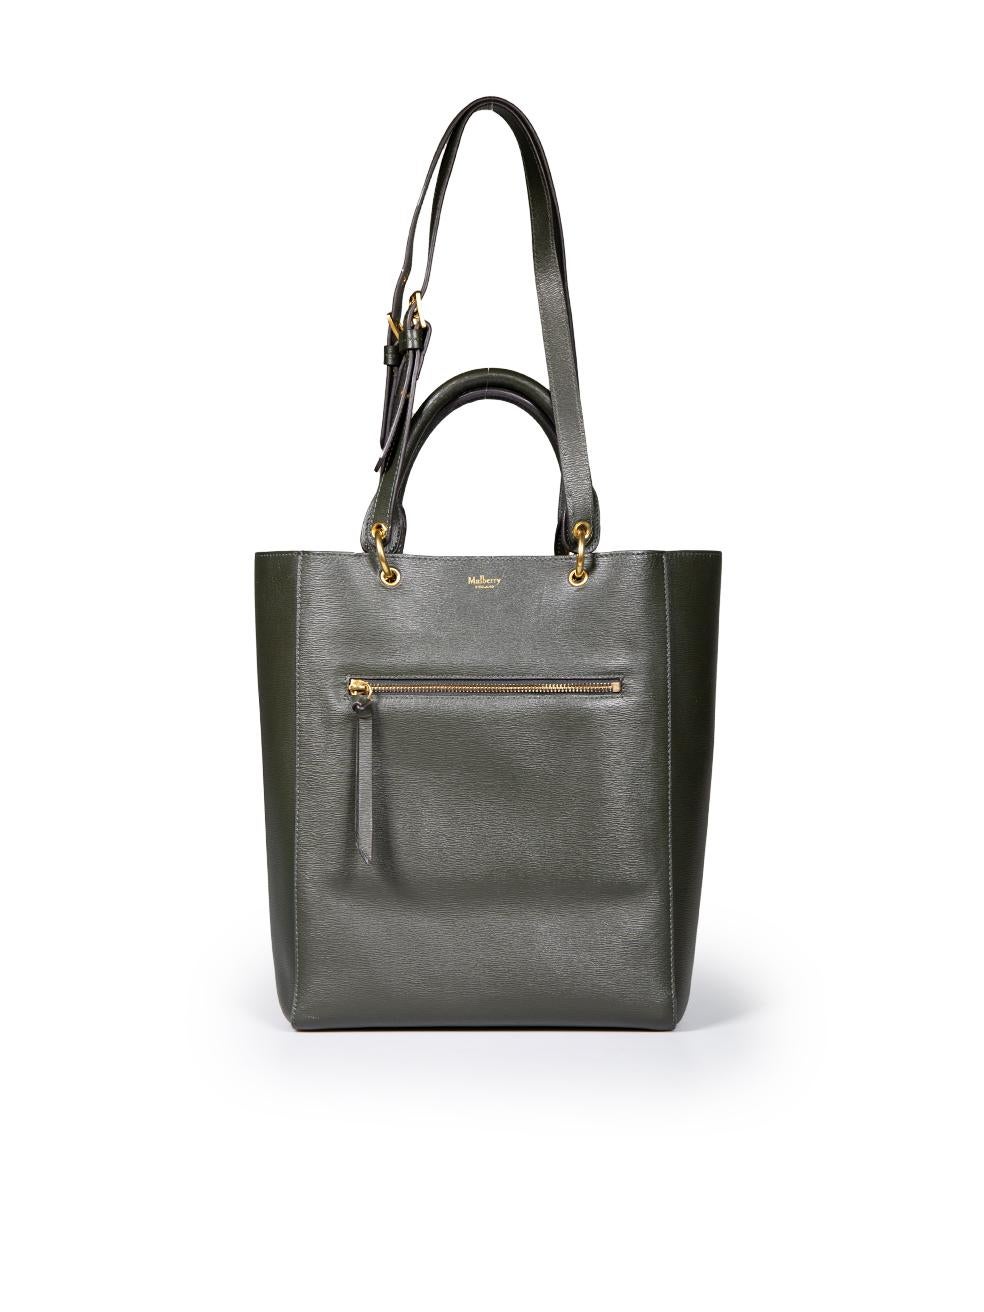 Mulberry Green Leather Maple Tote Bag im Zustand „Gut“ im Angebot in London, GB